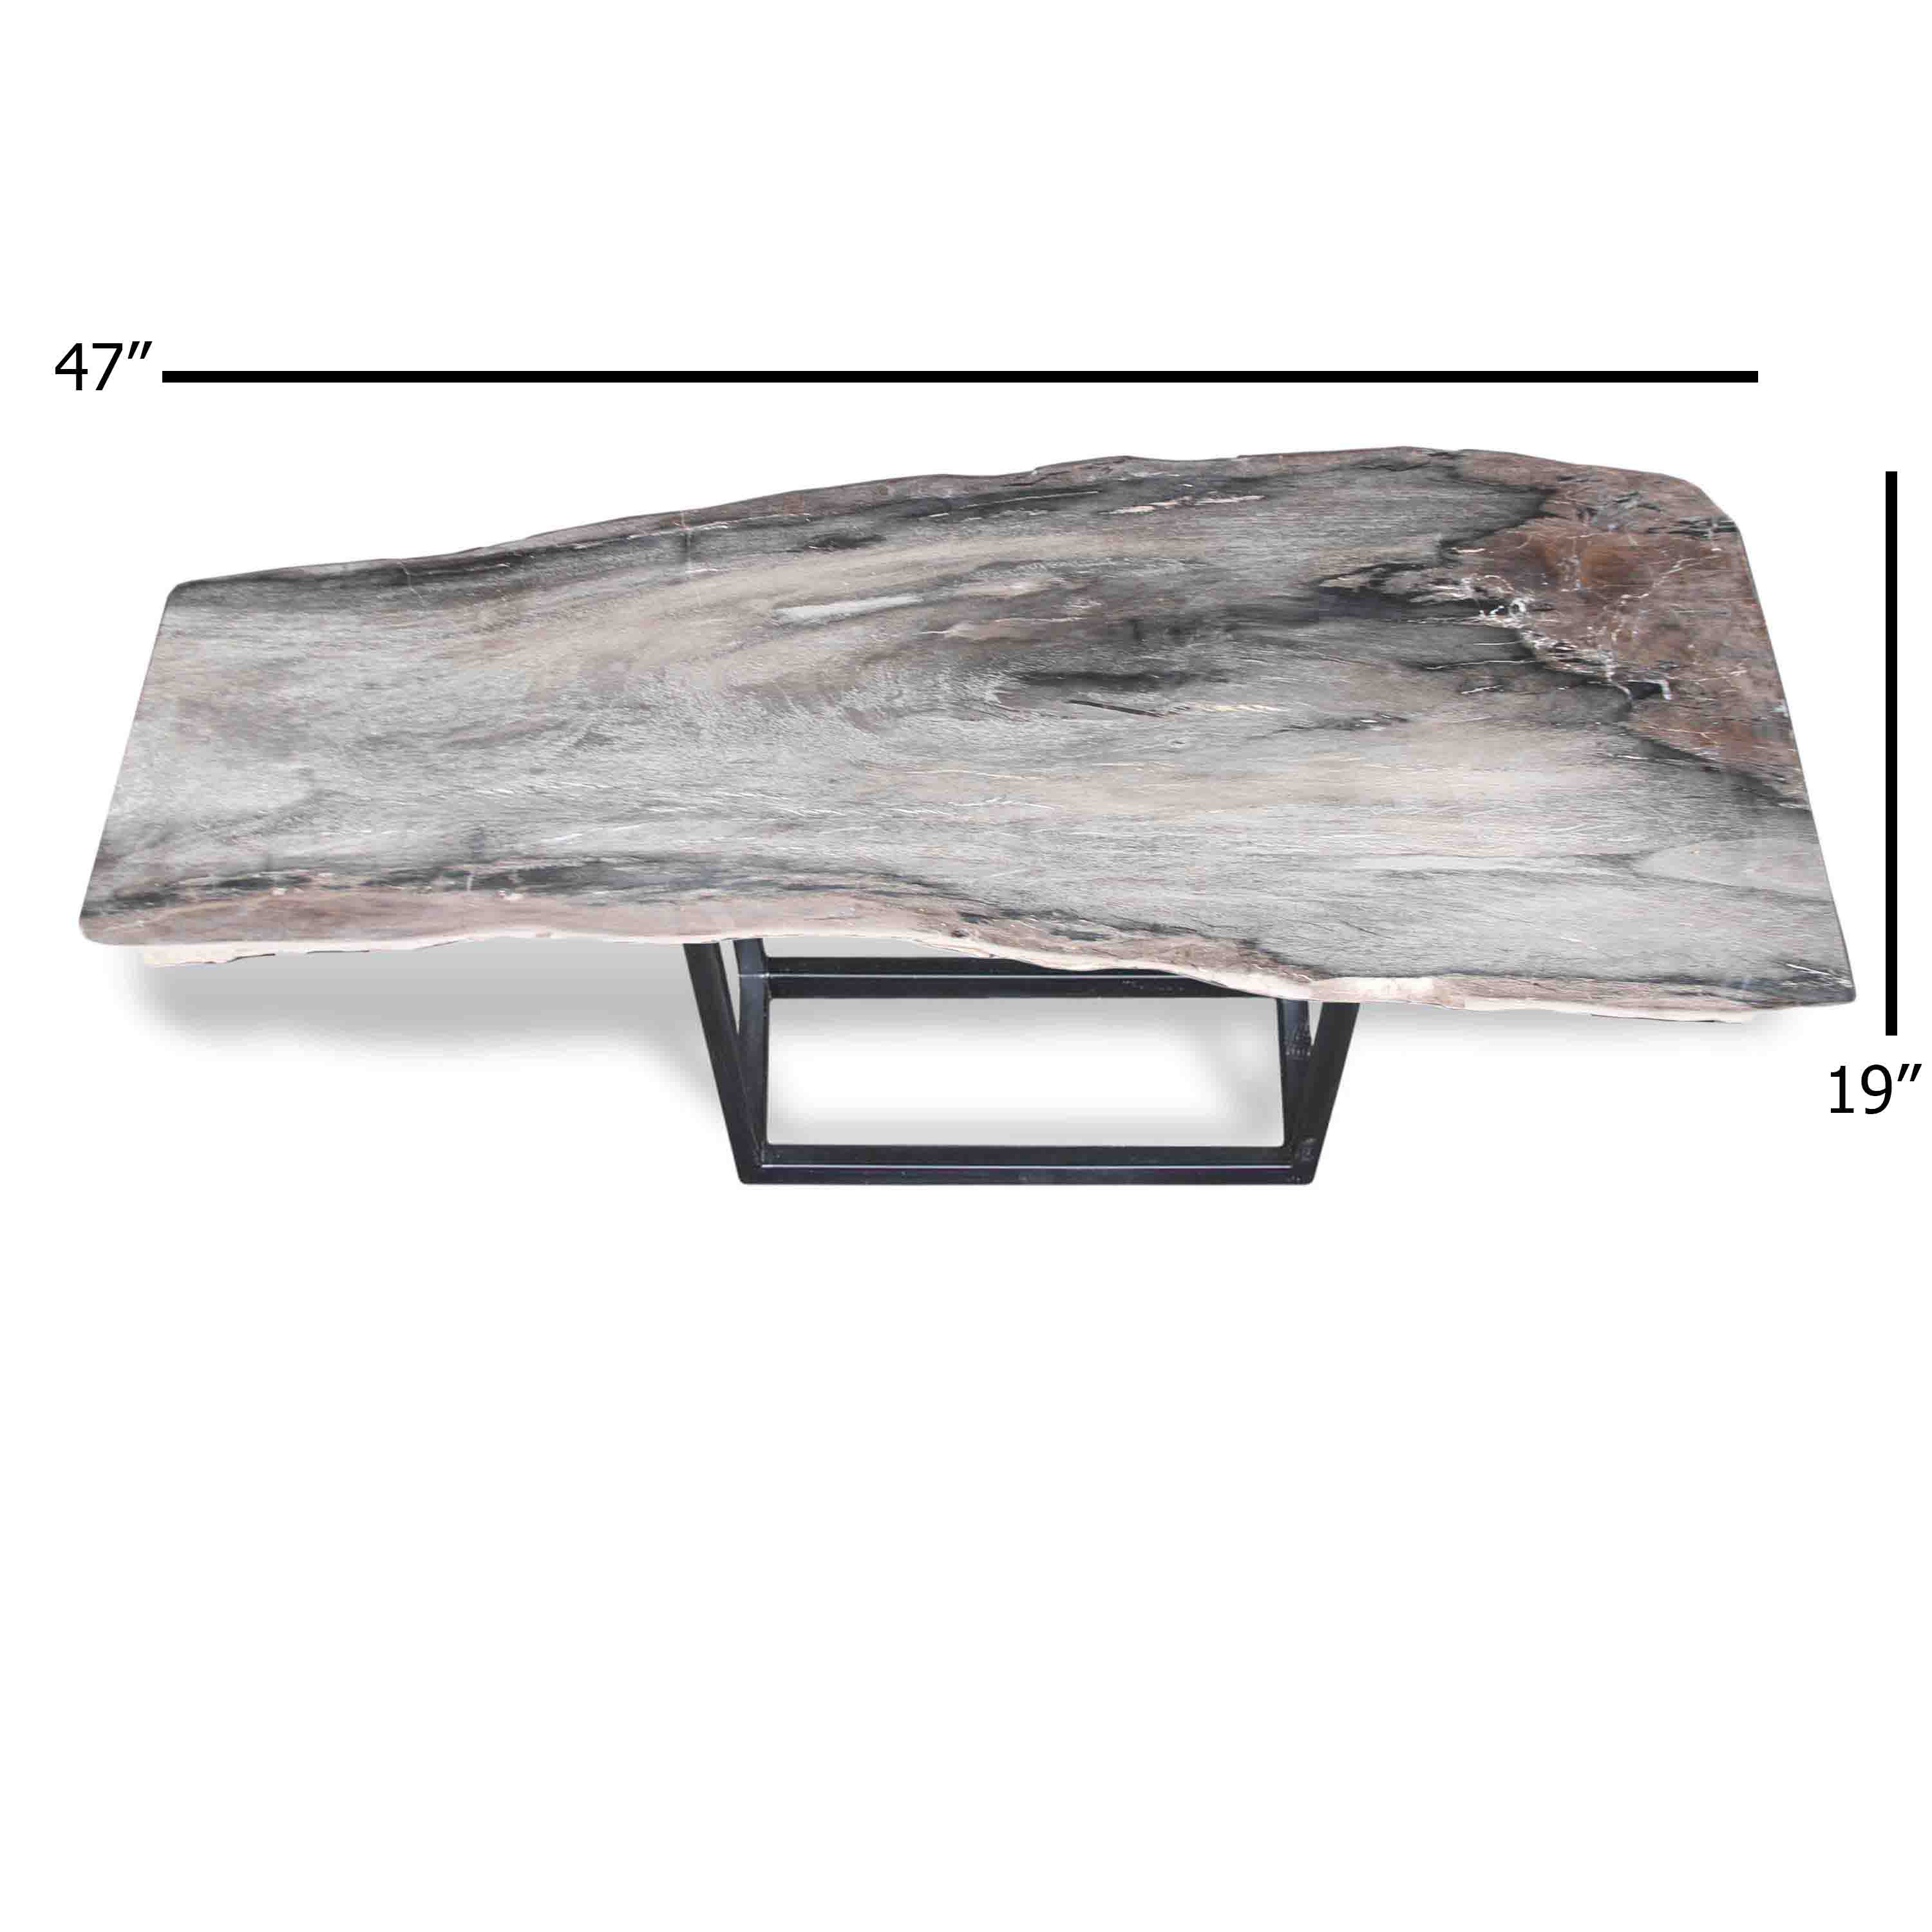 Kalifano Petrified Wood Natural Polished Petrified Wood Console Table from Indonesia - 47" / 88 lbs PWR4800.001